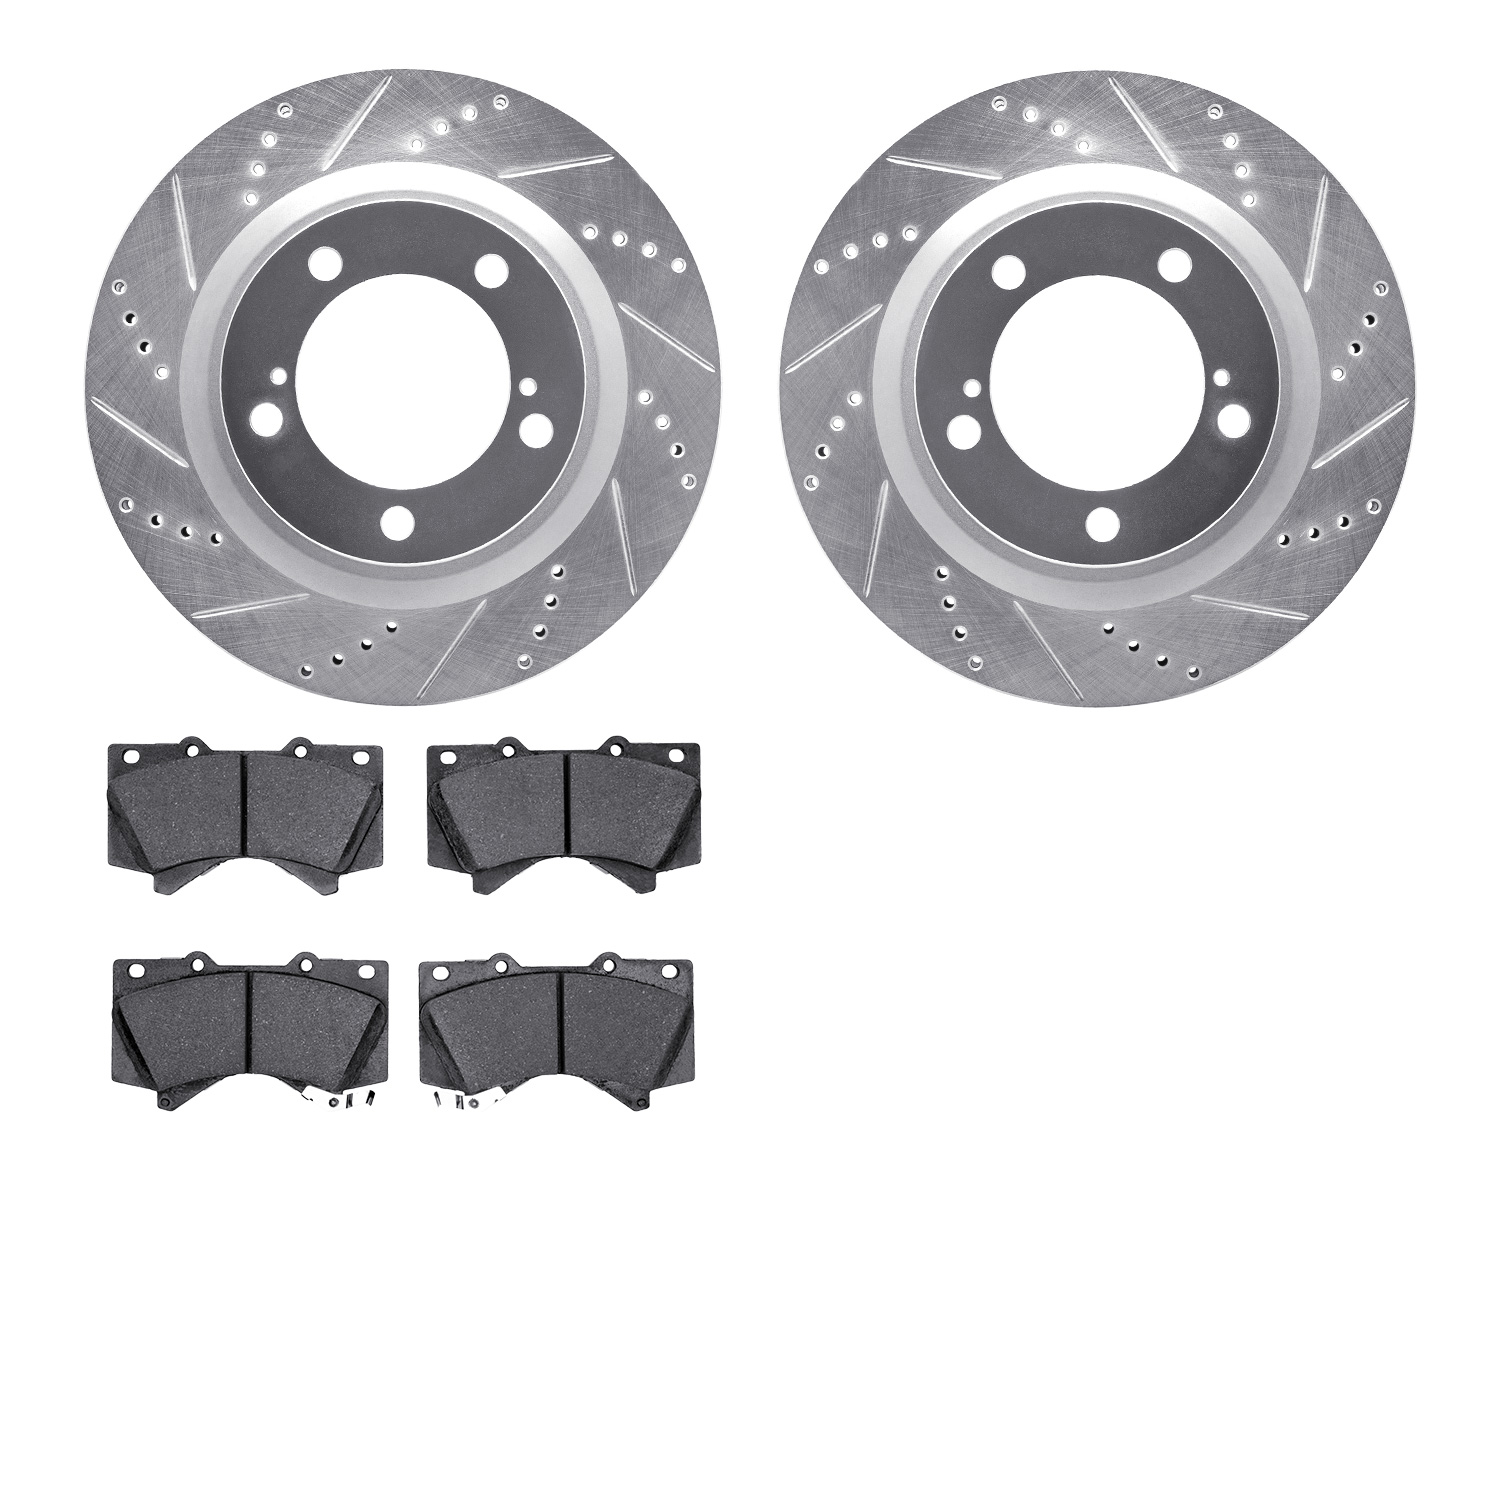 7402-76020 Drilled/Slotted Brake Rotors with Ultimate-Duty Brake Pads Kit [Silver], Fits Select Lexus/Toyota/Scion, Position: Fr